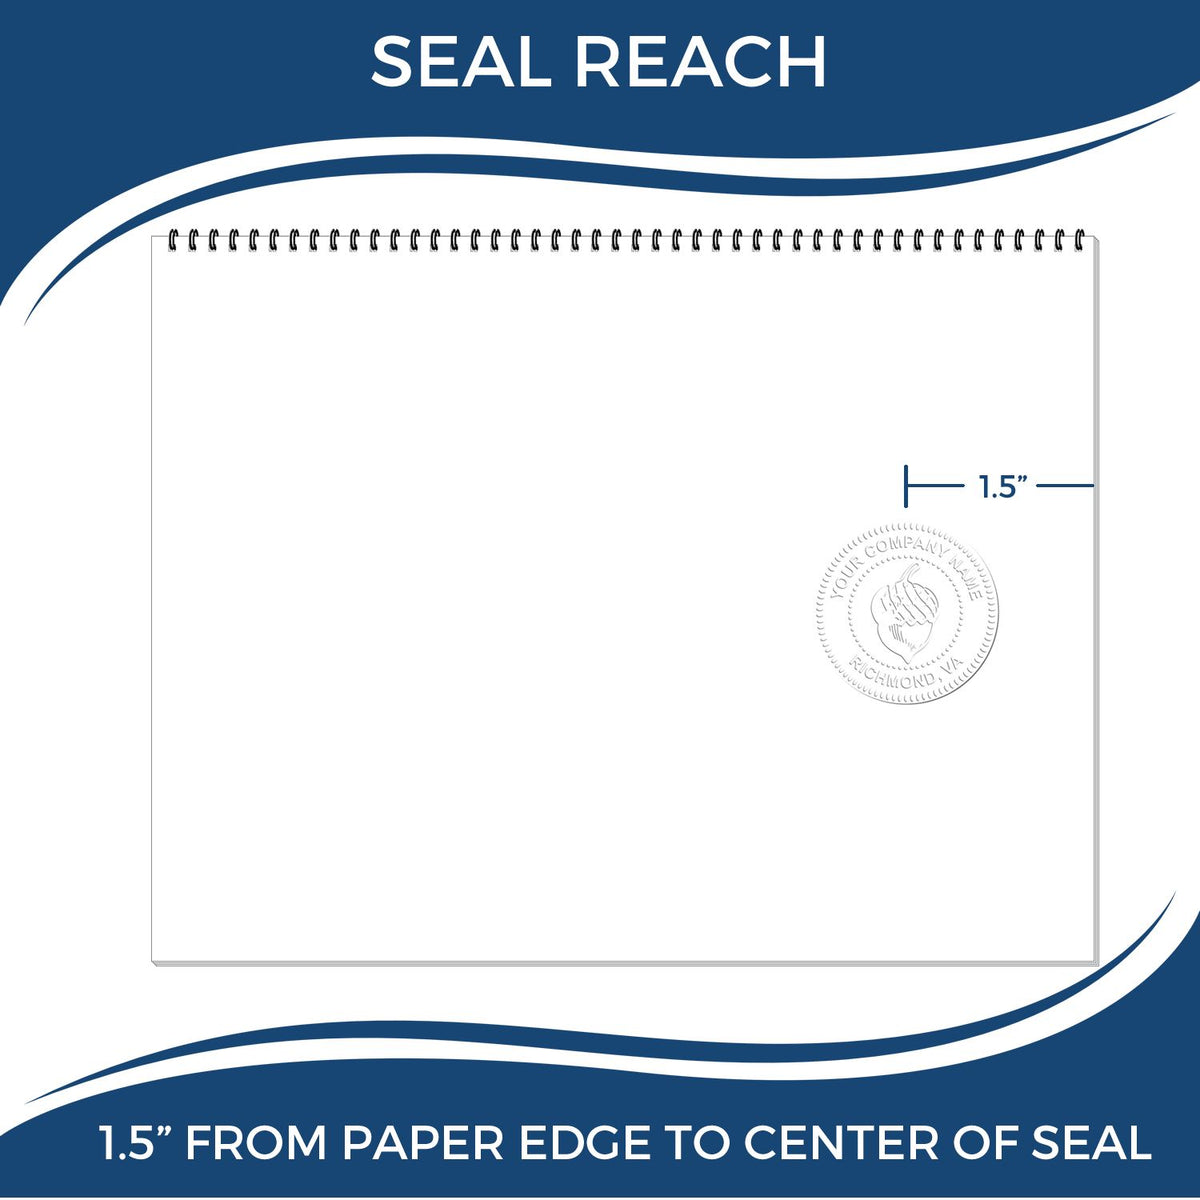 An infographic showing the seal reach which is represented by a ruler and a miniature seal image of the Gift New Mexico Architect Seal